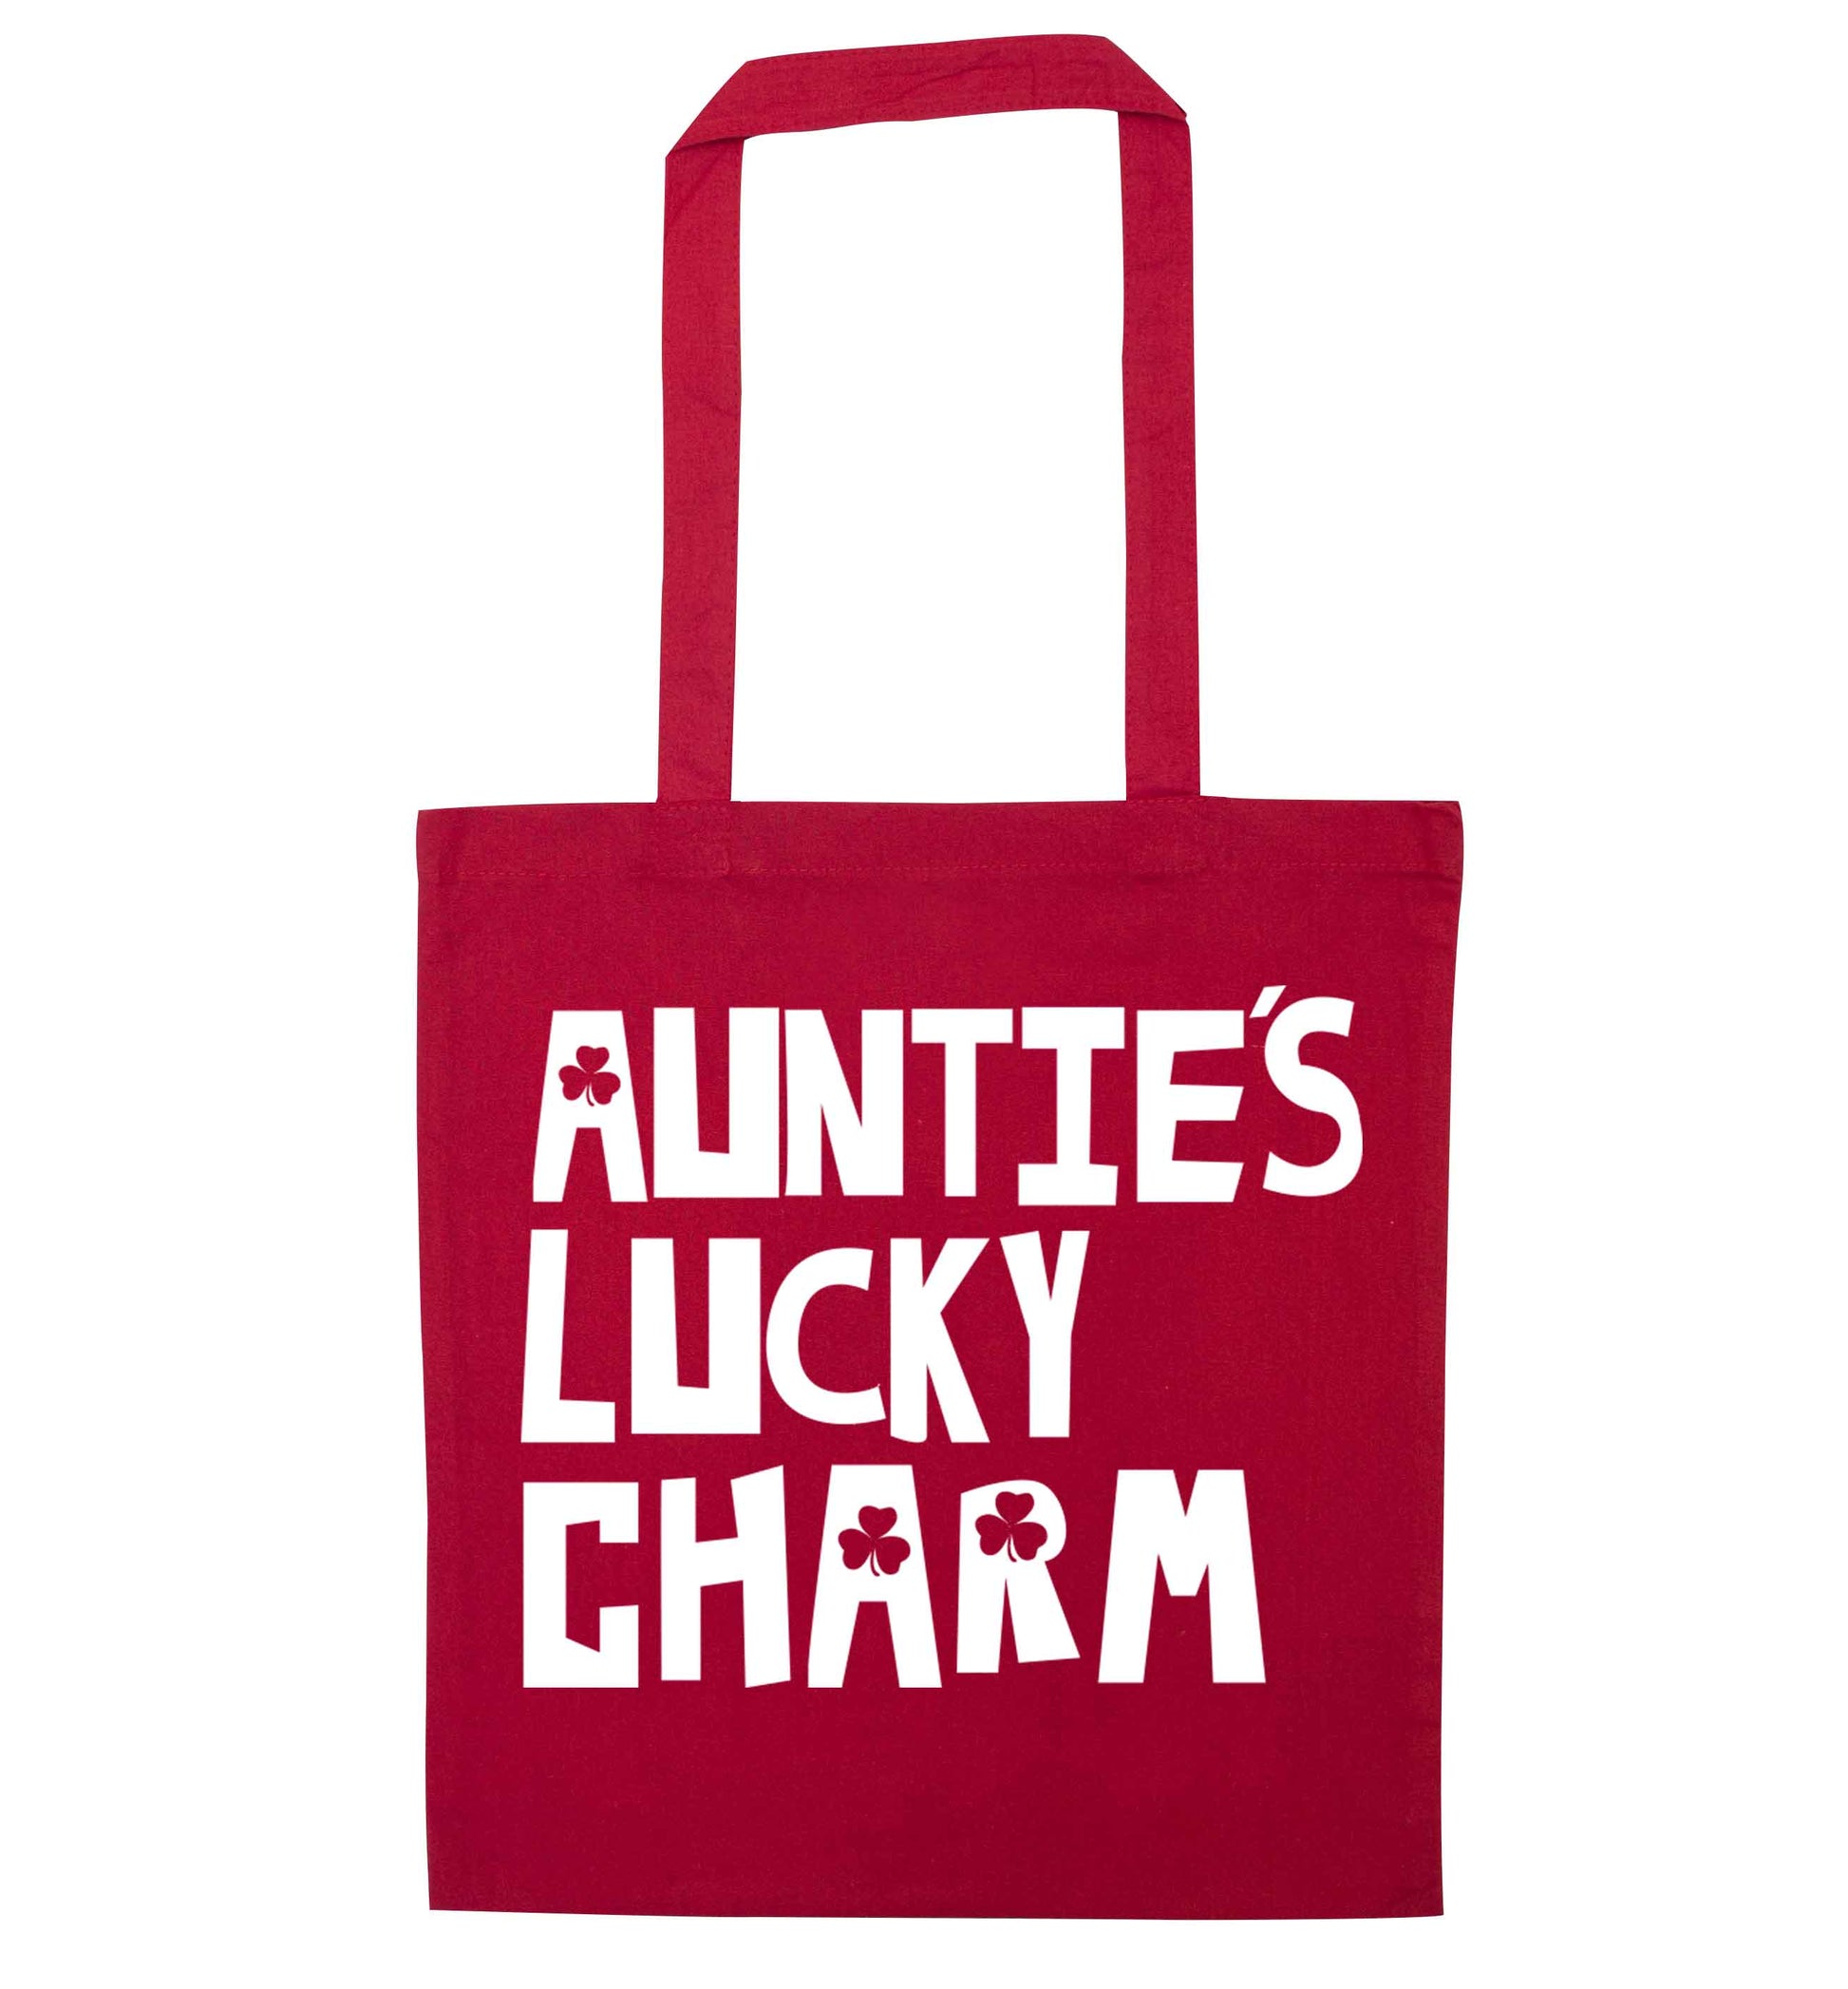 Auntie's lucky charm red tote bag